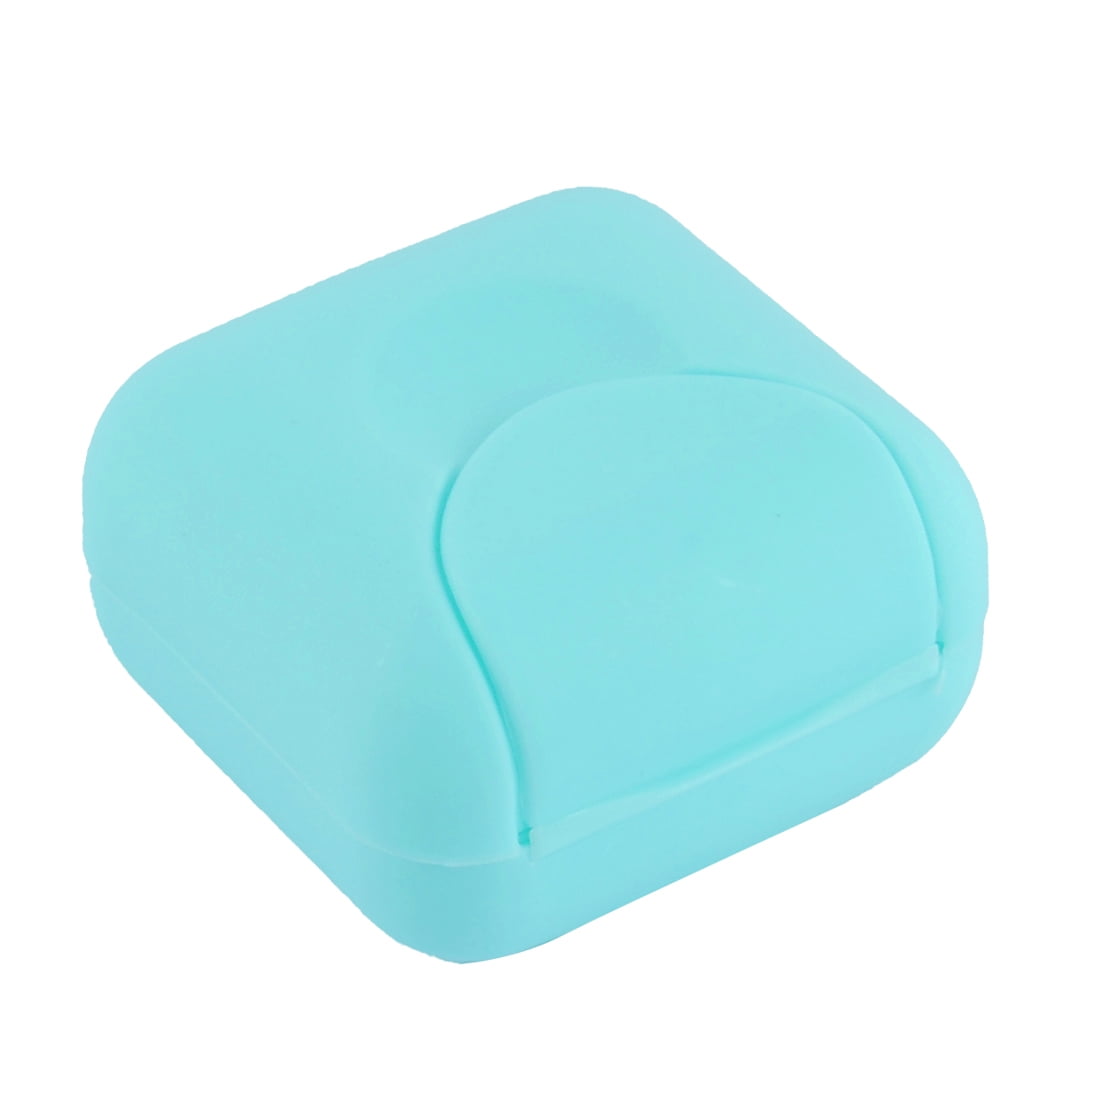 Details about   Portable Bar Soap Plate Container Box Bathroom Essential Travel Pack Storage Kit 